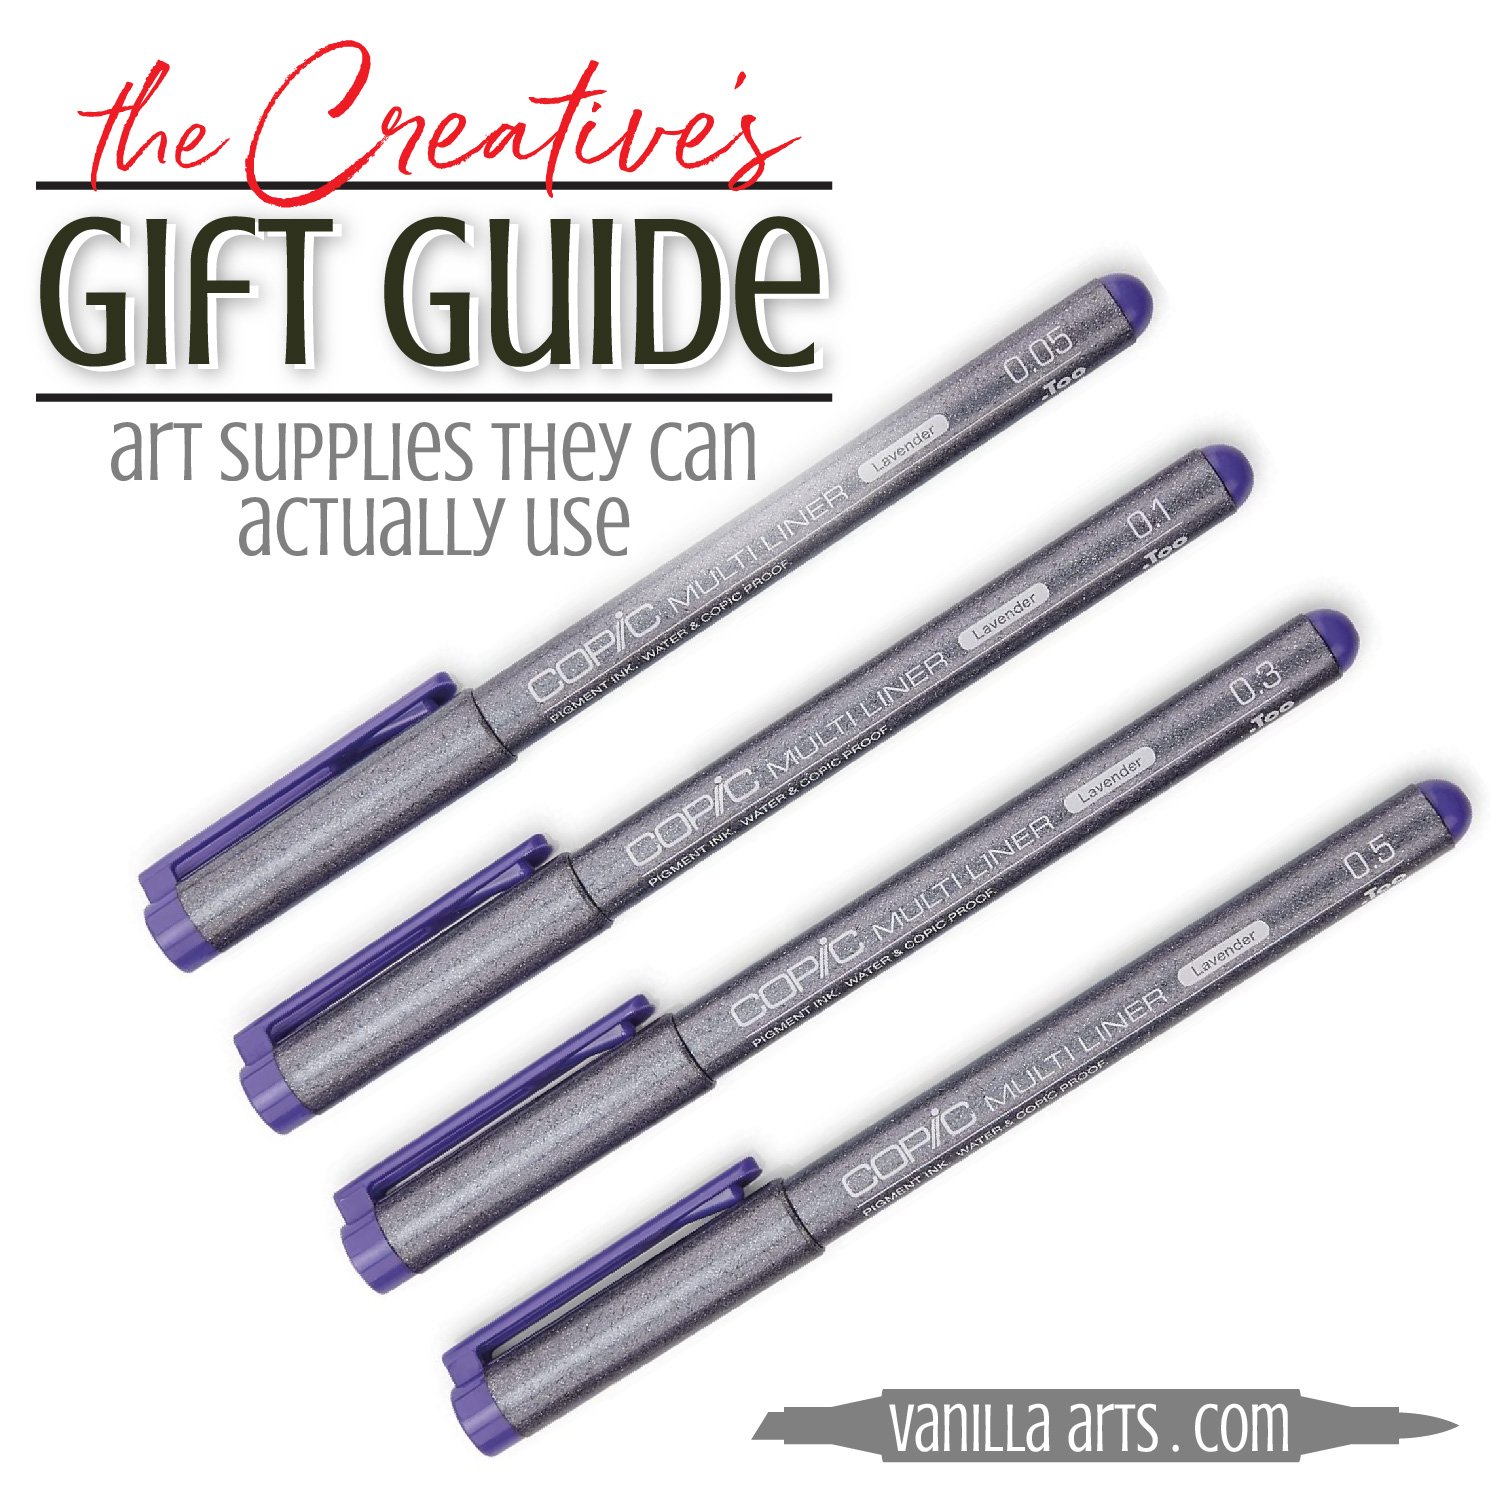 Review & Giveaway: Coloring with Inexpensive Markers – Graciellie Design